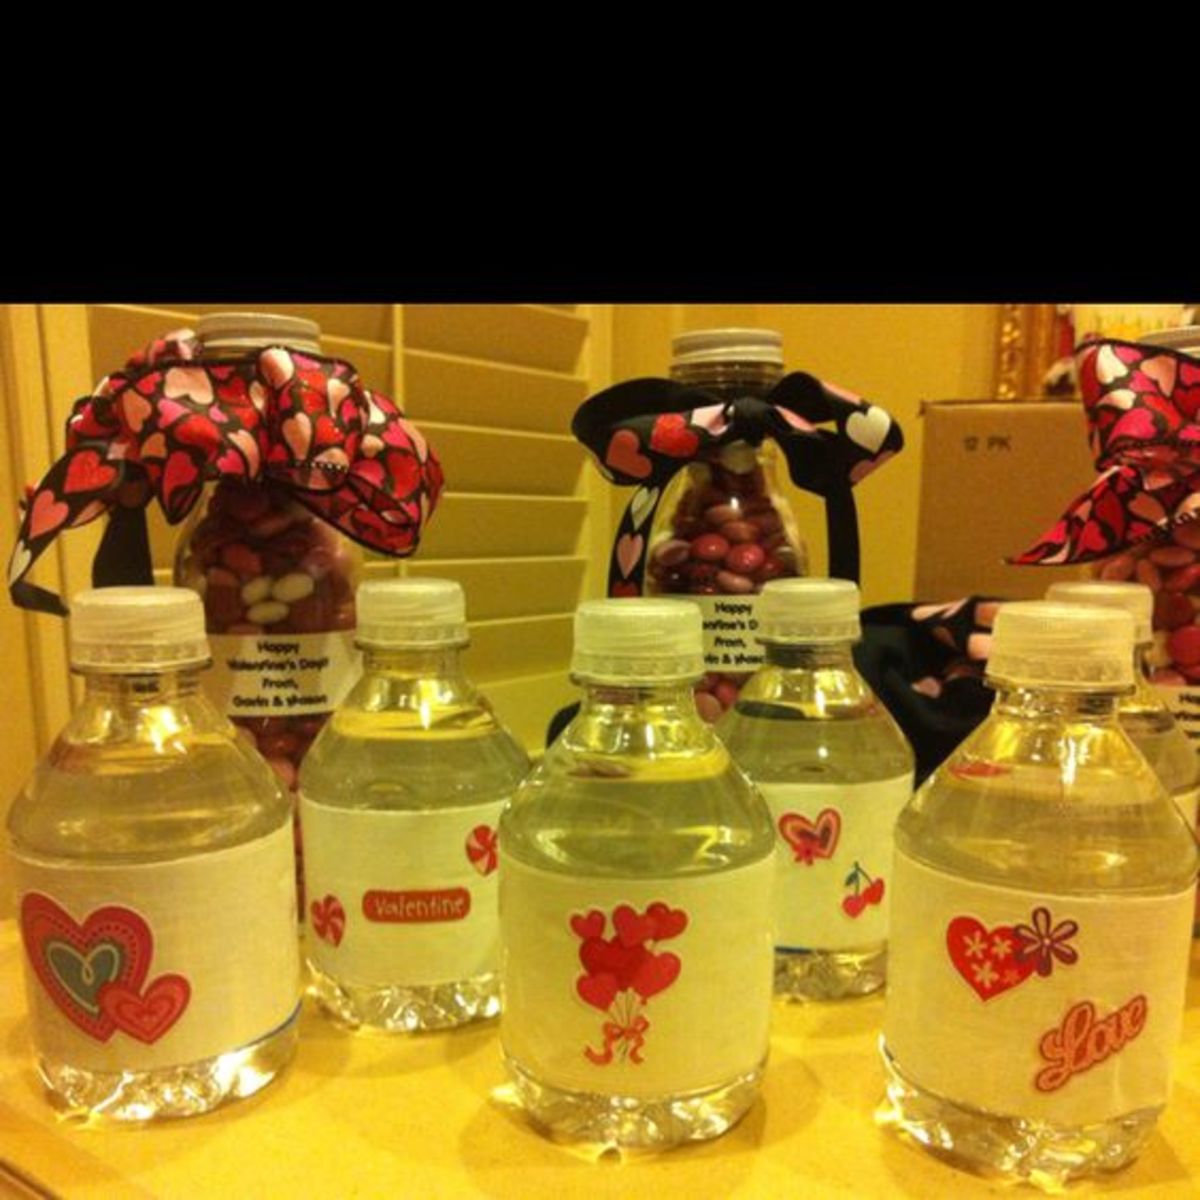 Cute Mini Waters for the Class Valentine party... Easy to cover label with Duct tape, add cute holiday stickers, and plenty of room for the kids to write their names on it.